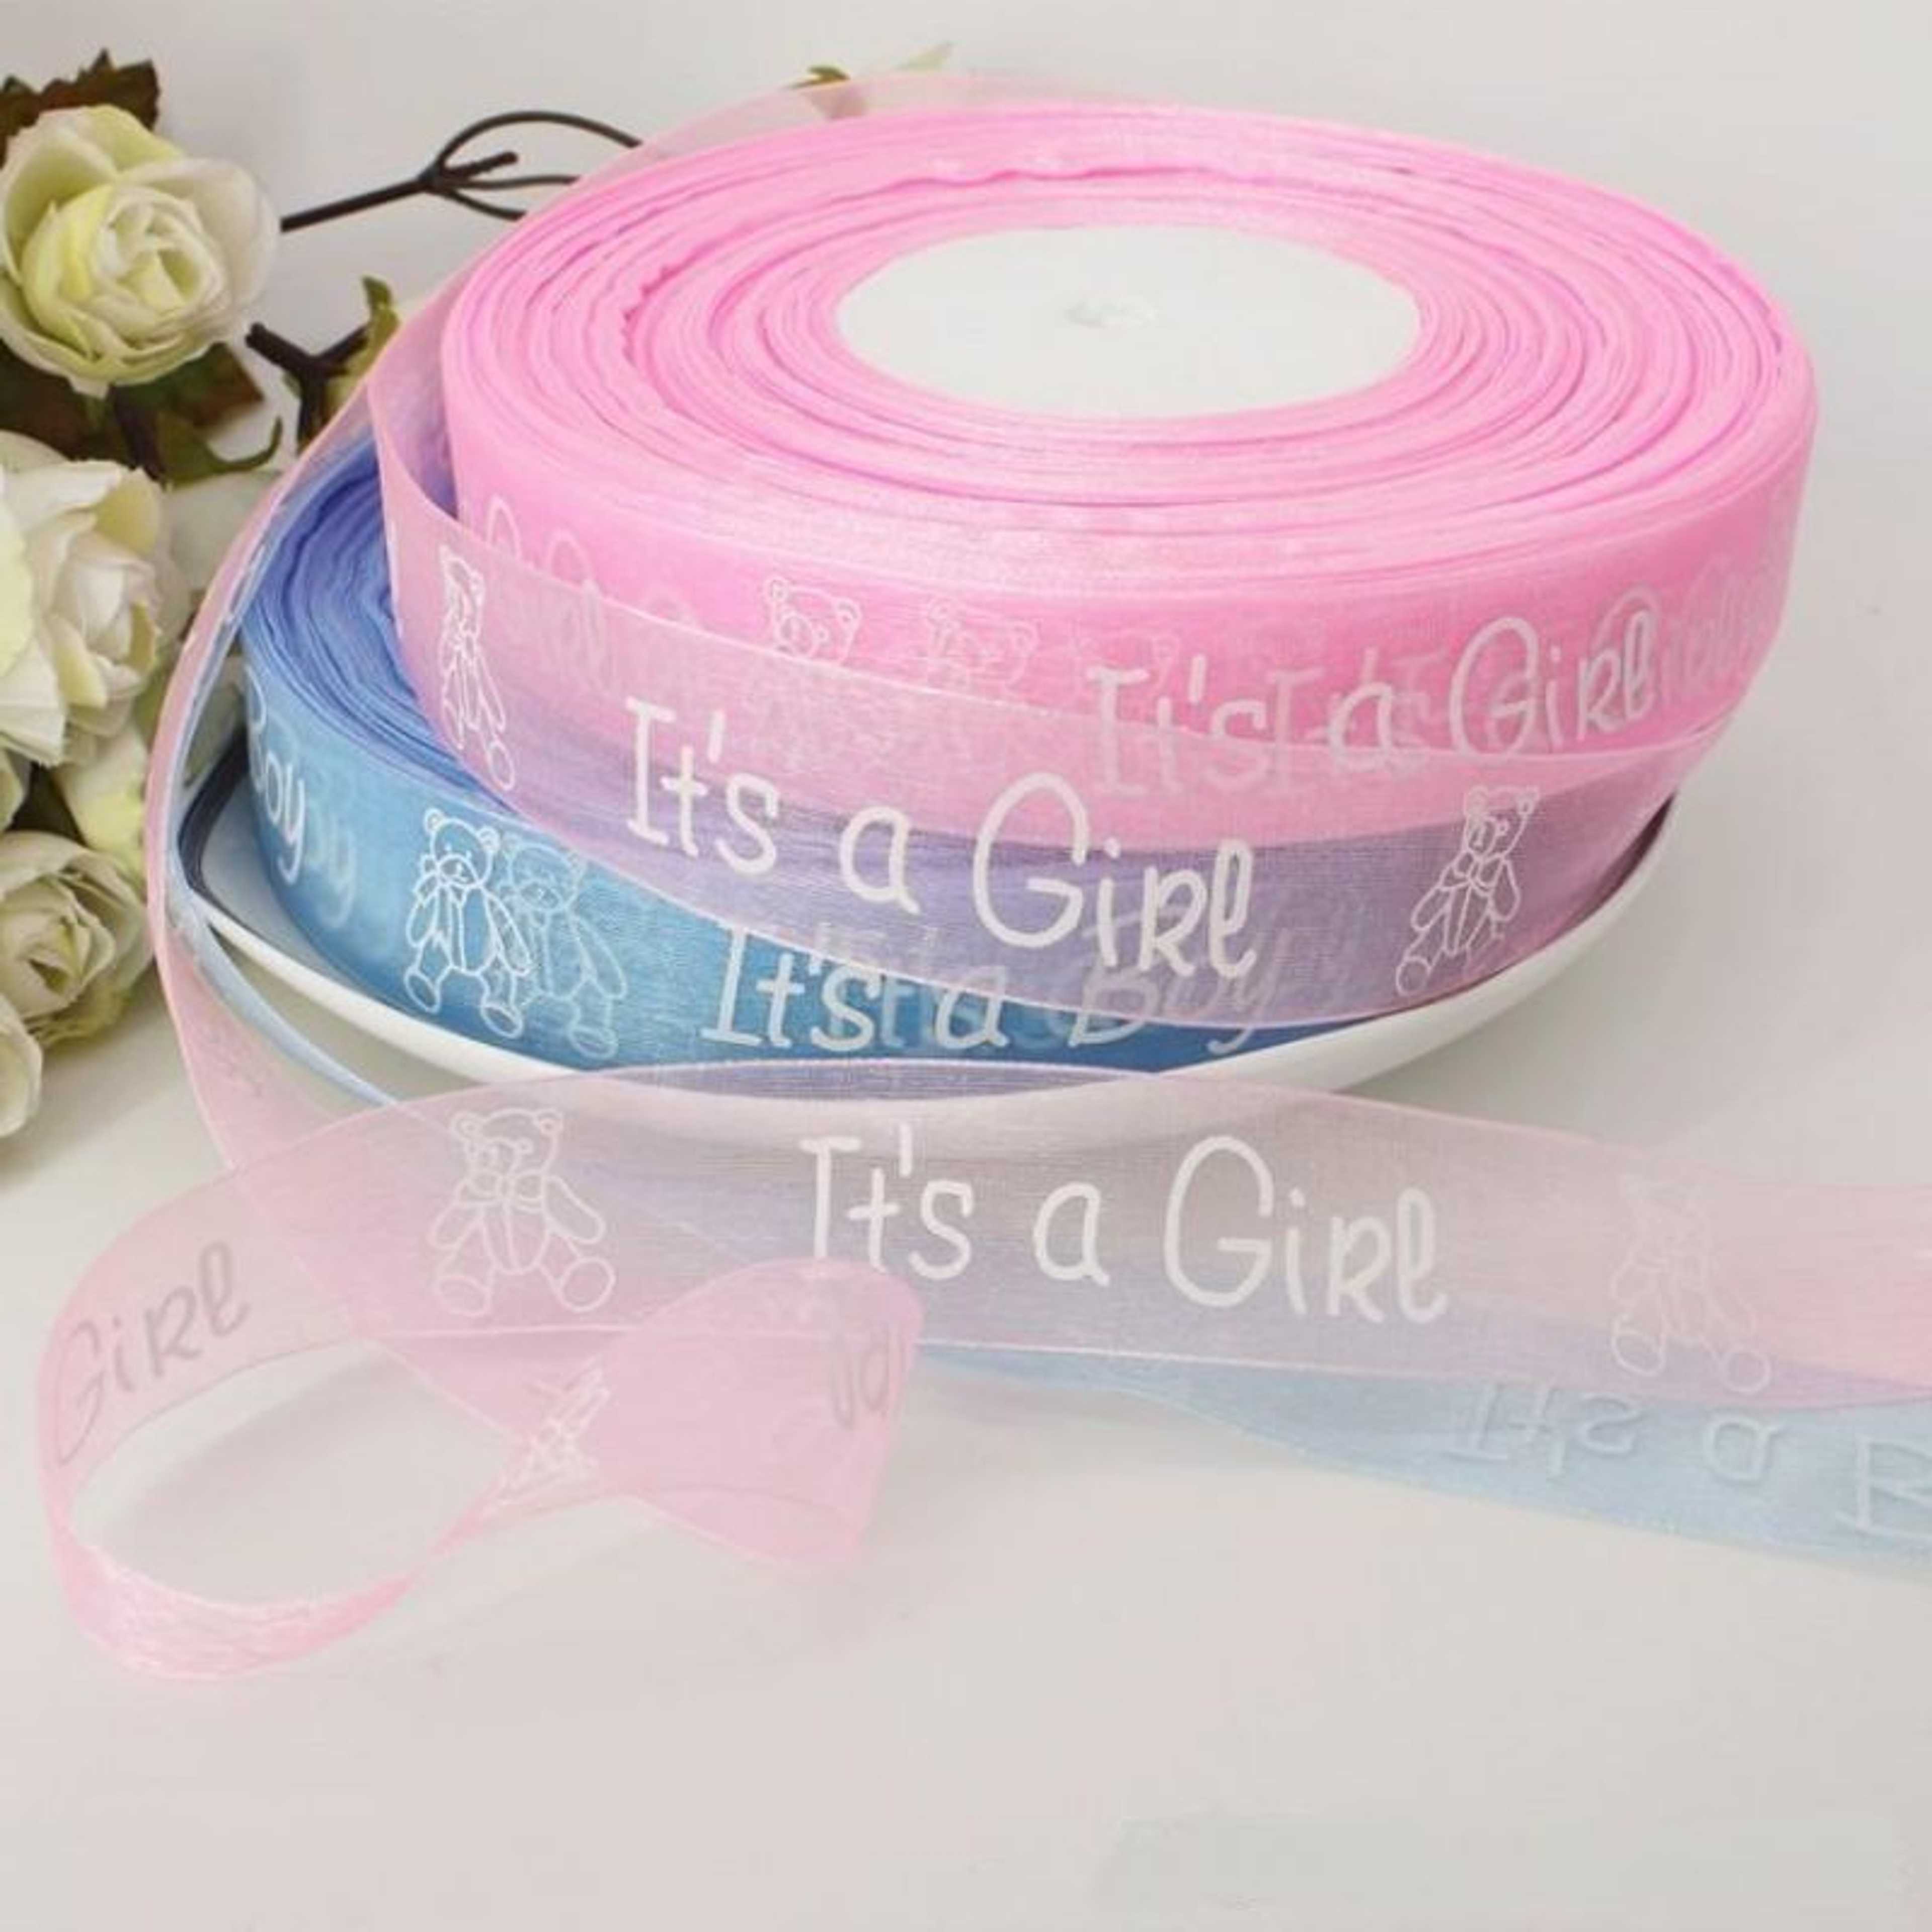 Favors Ribbons Baby Shower 50 Yards Its a Boy or Girl Organza Printed Roll 1.5 cm or 2.5 cm Width Blue Pink Baby Cake Shower Party Wrapping Gift Box Packing